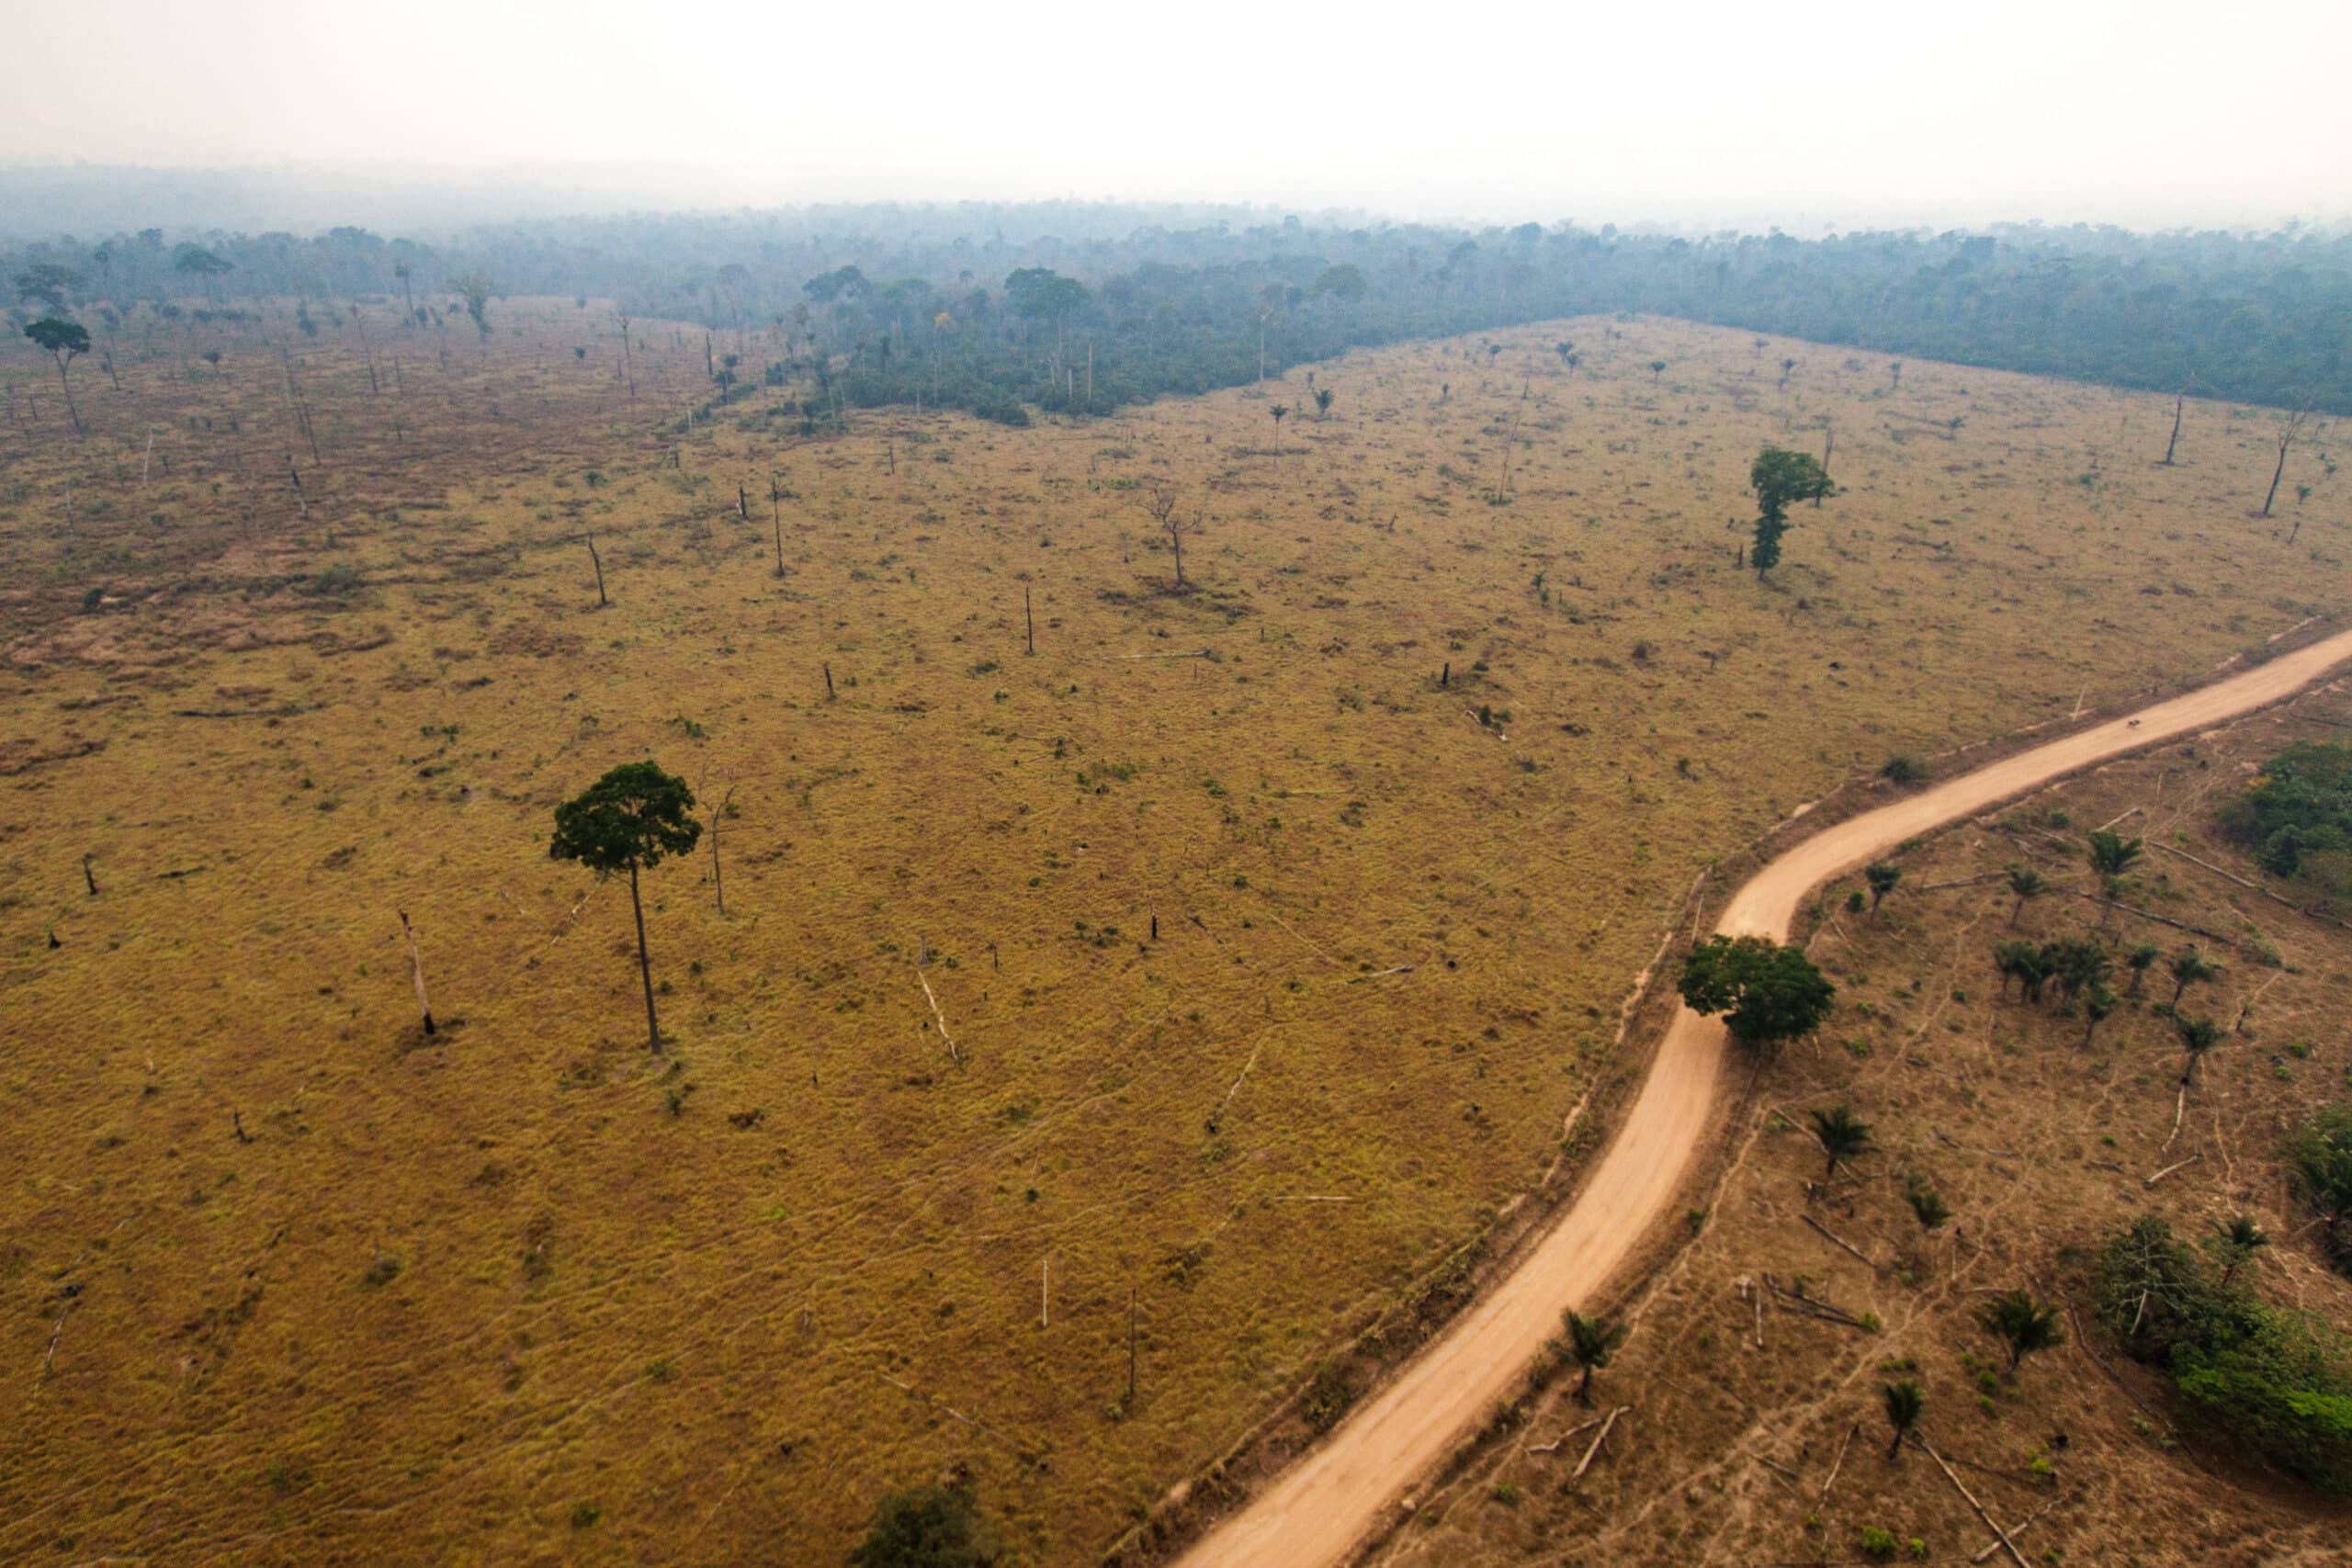 Protecting the Amazon from Rampant Deforestation